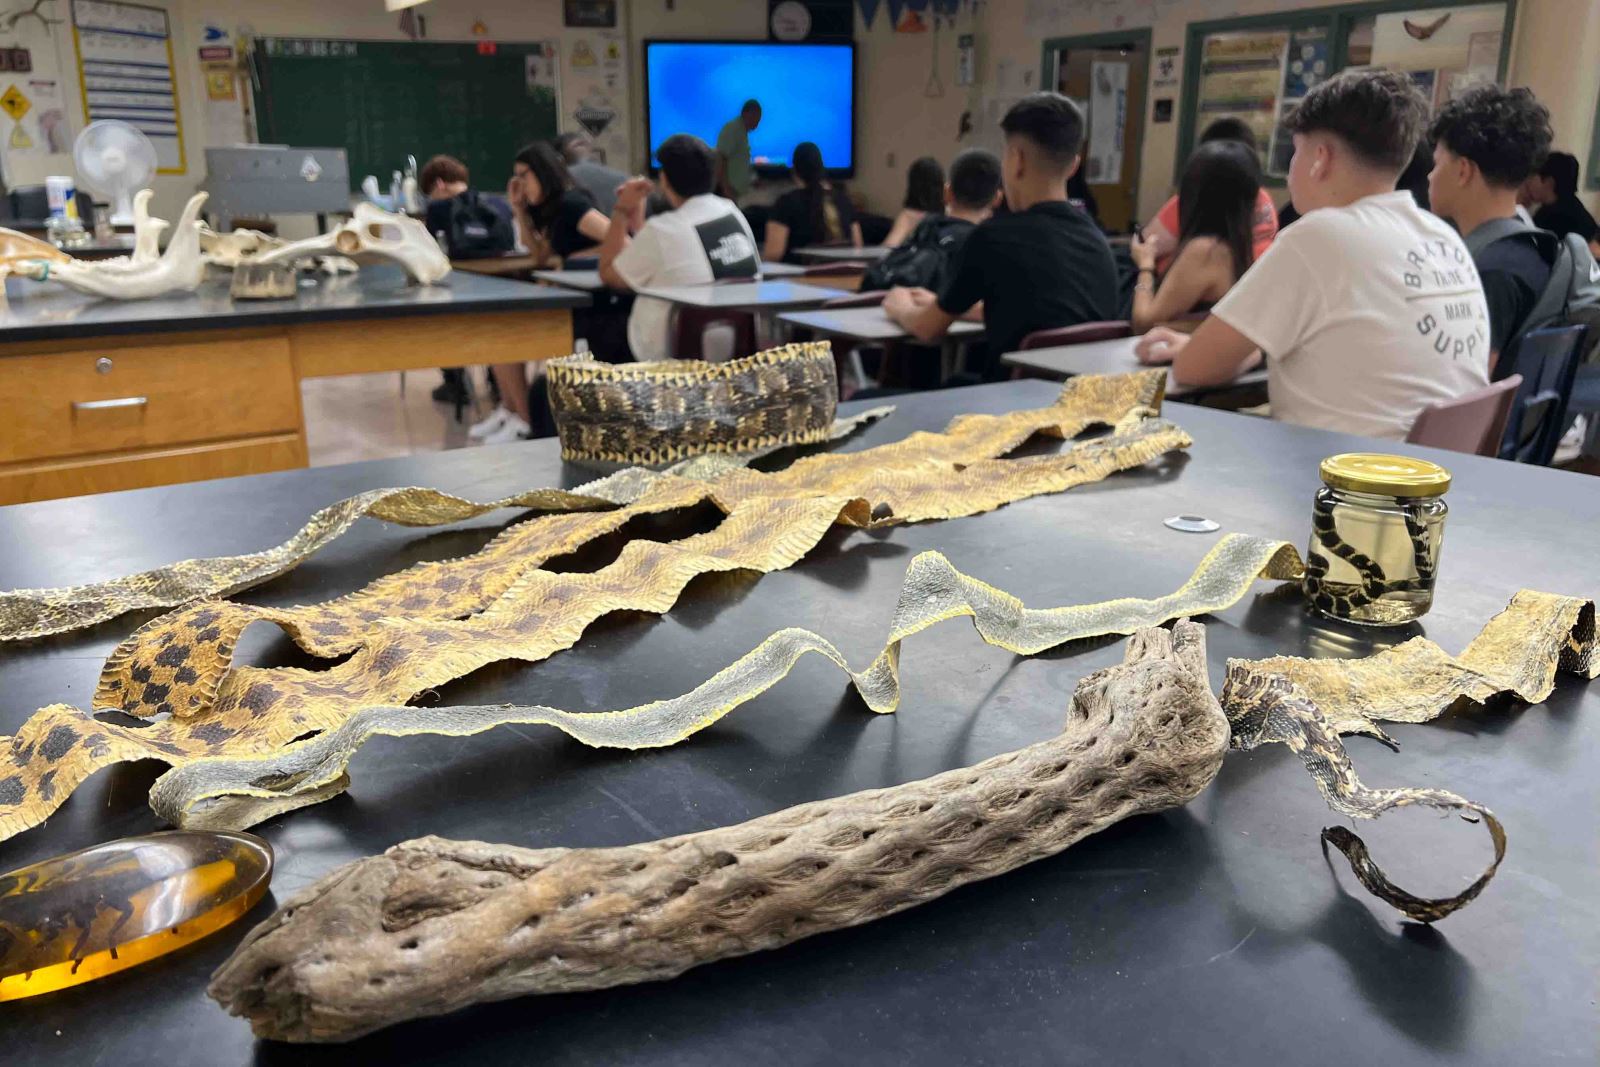 Some snakeskins and other artifacts in the back of a science classroom at Cholla High School